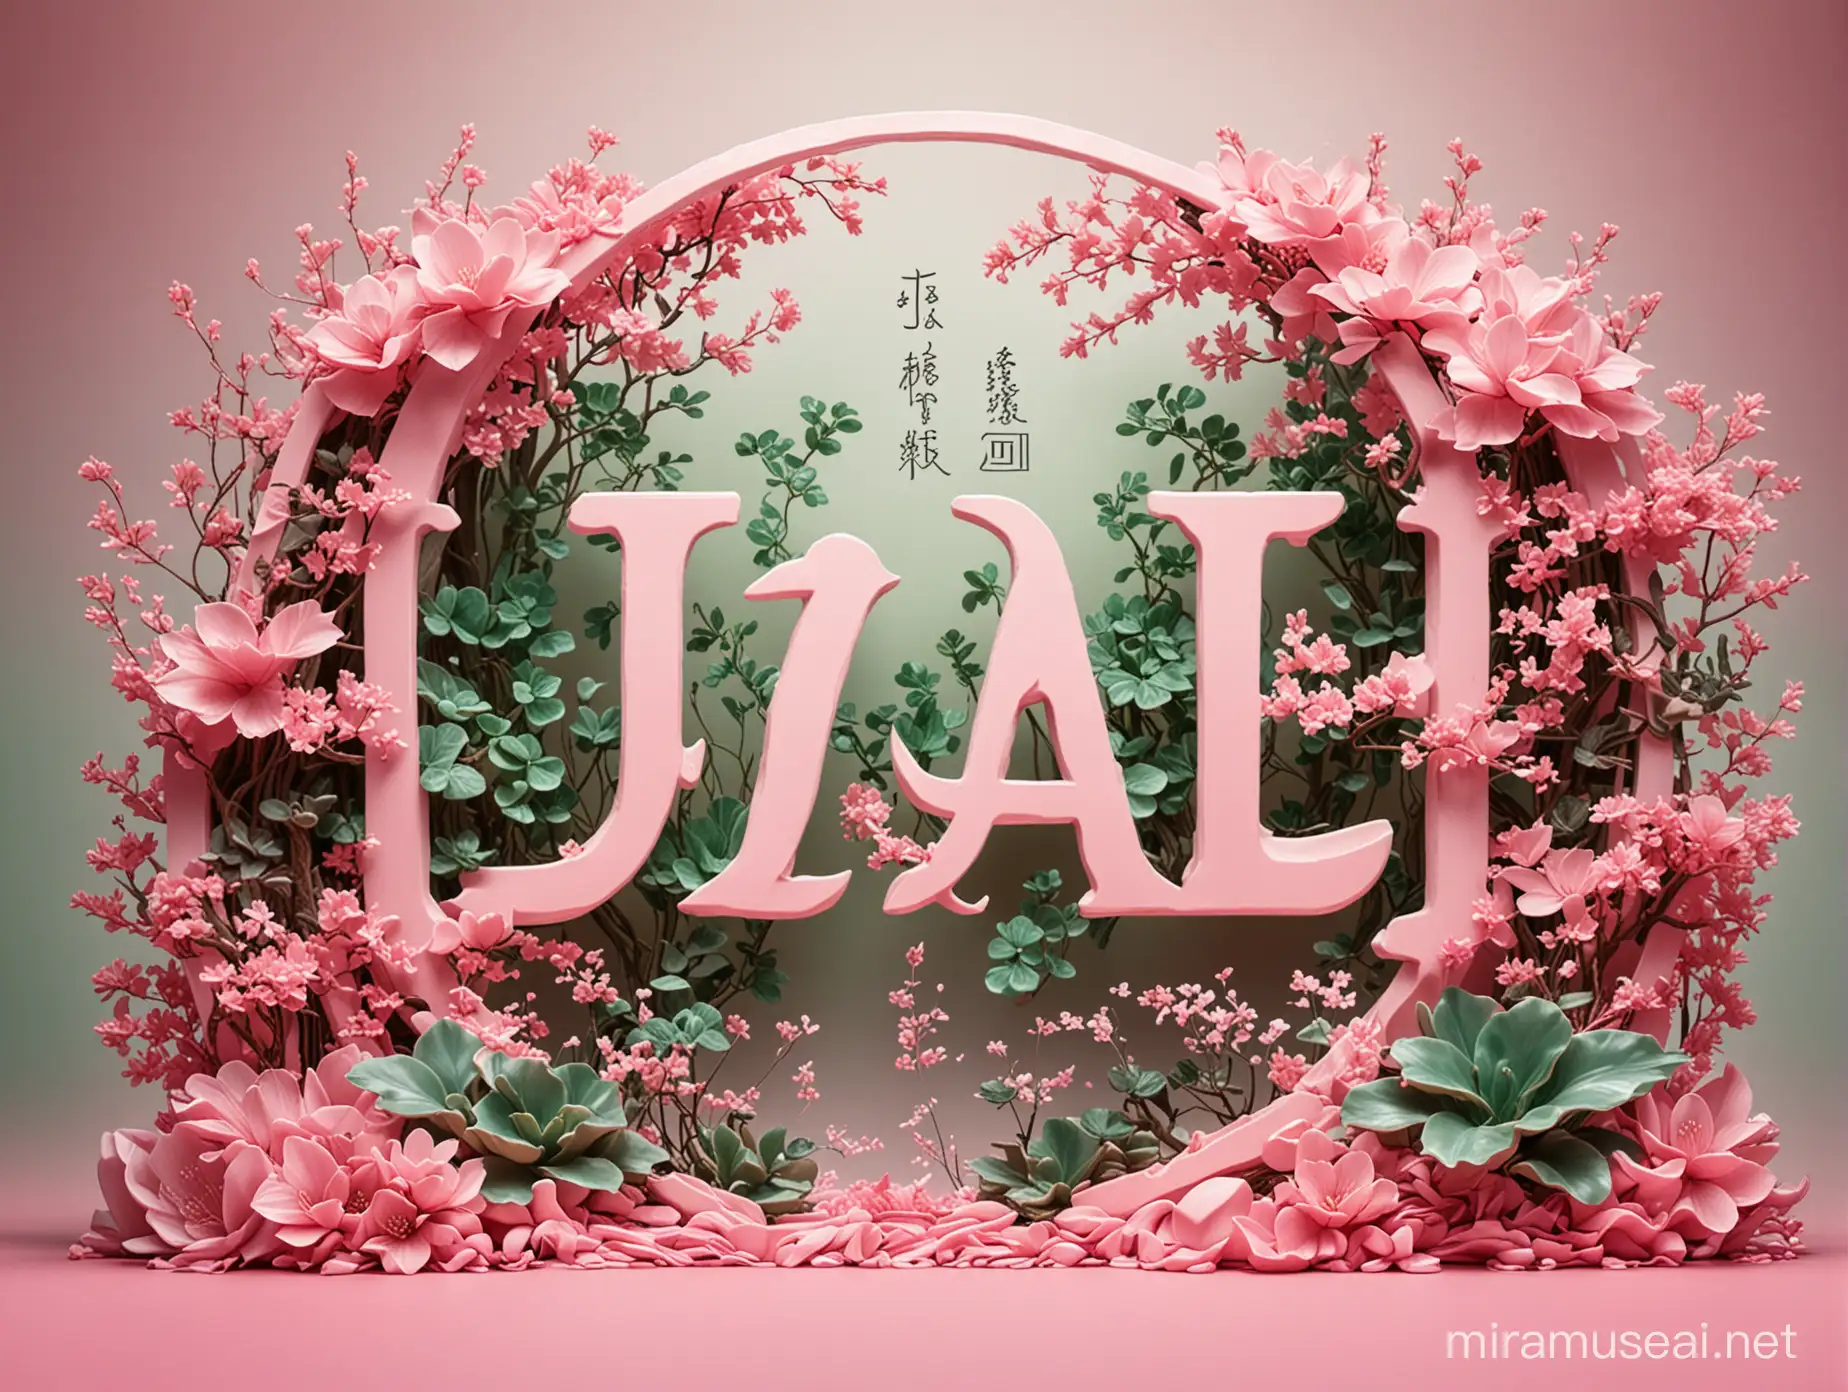 Beautiful jade garden background with J.A.D.E written out in a stunning pink color